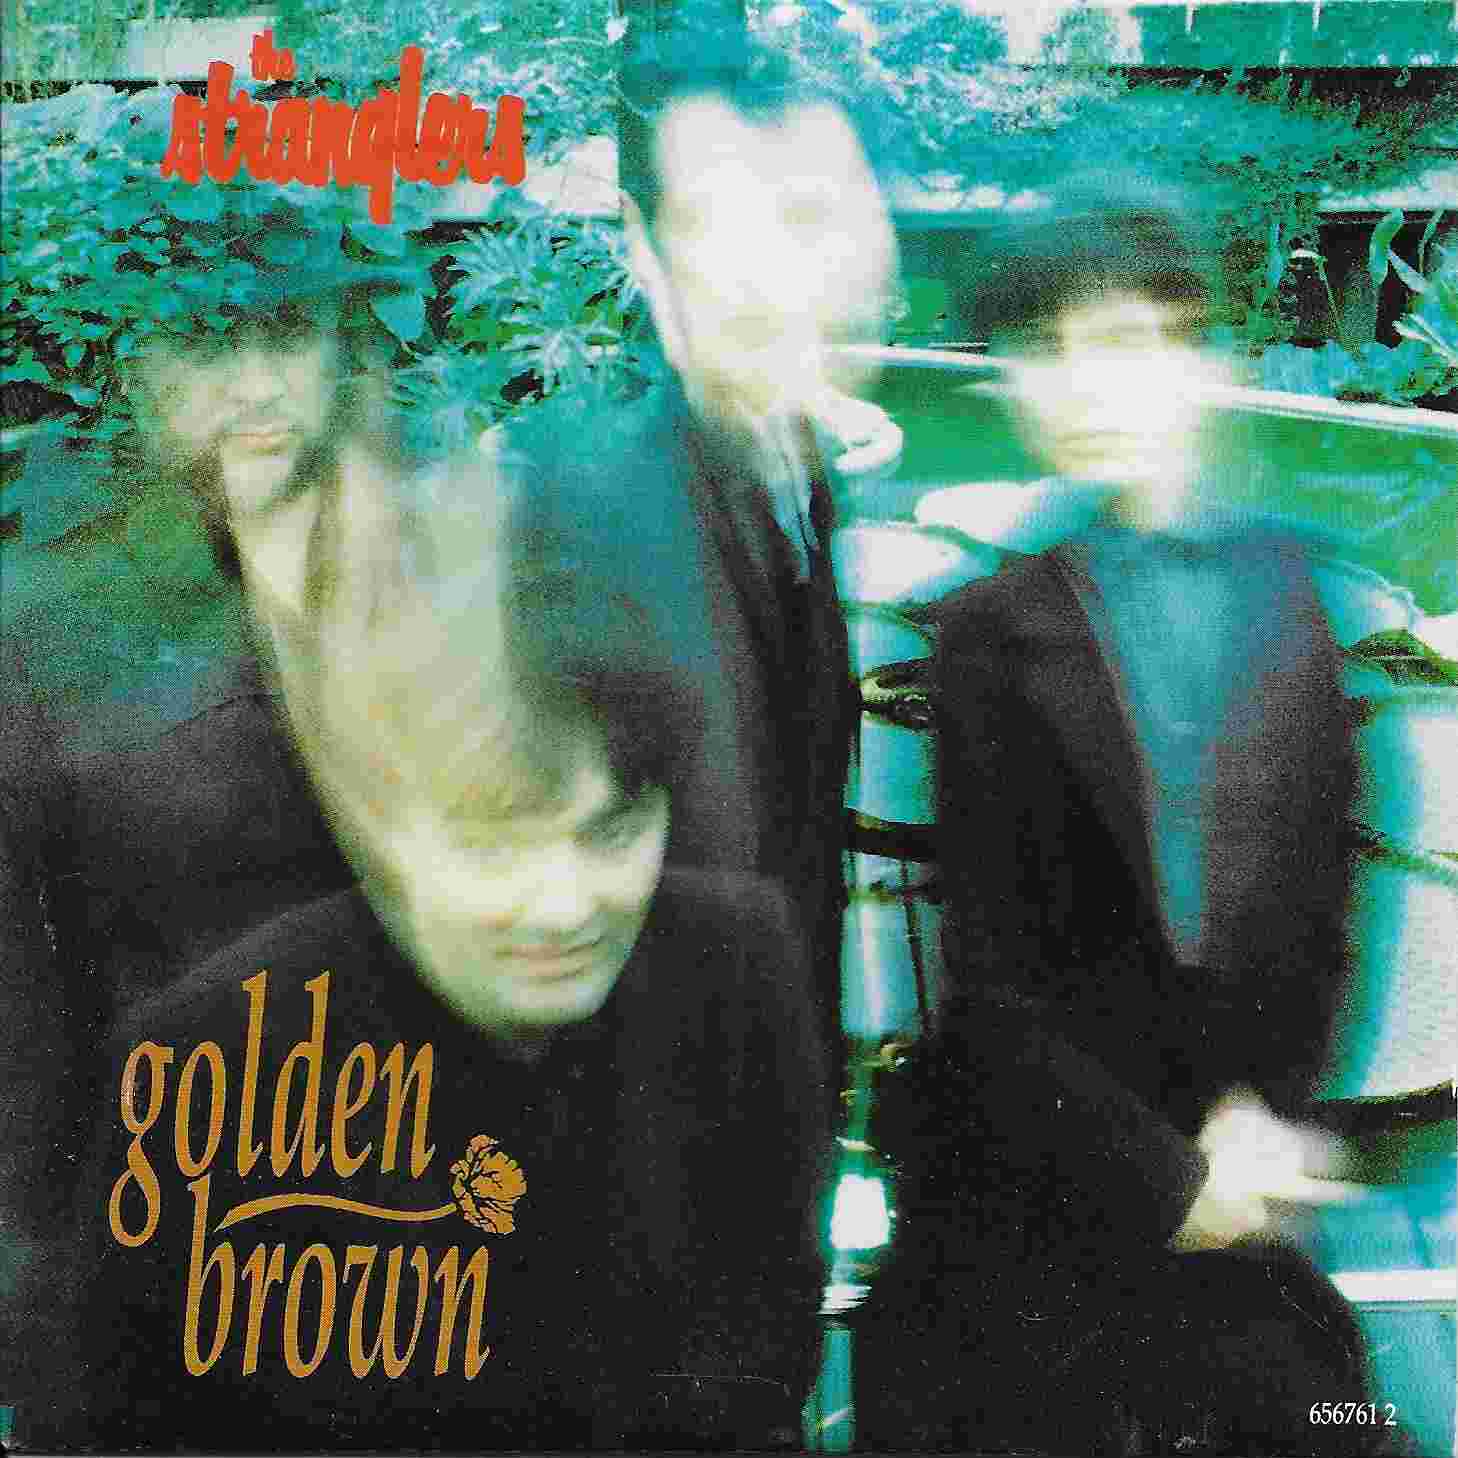 Picture of 656761 2 Golden brown by artist The Stranglers  from The Stranglers cdsingles